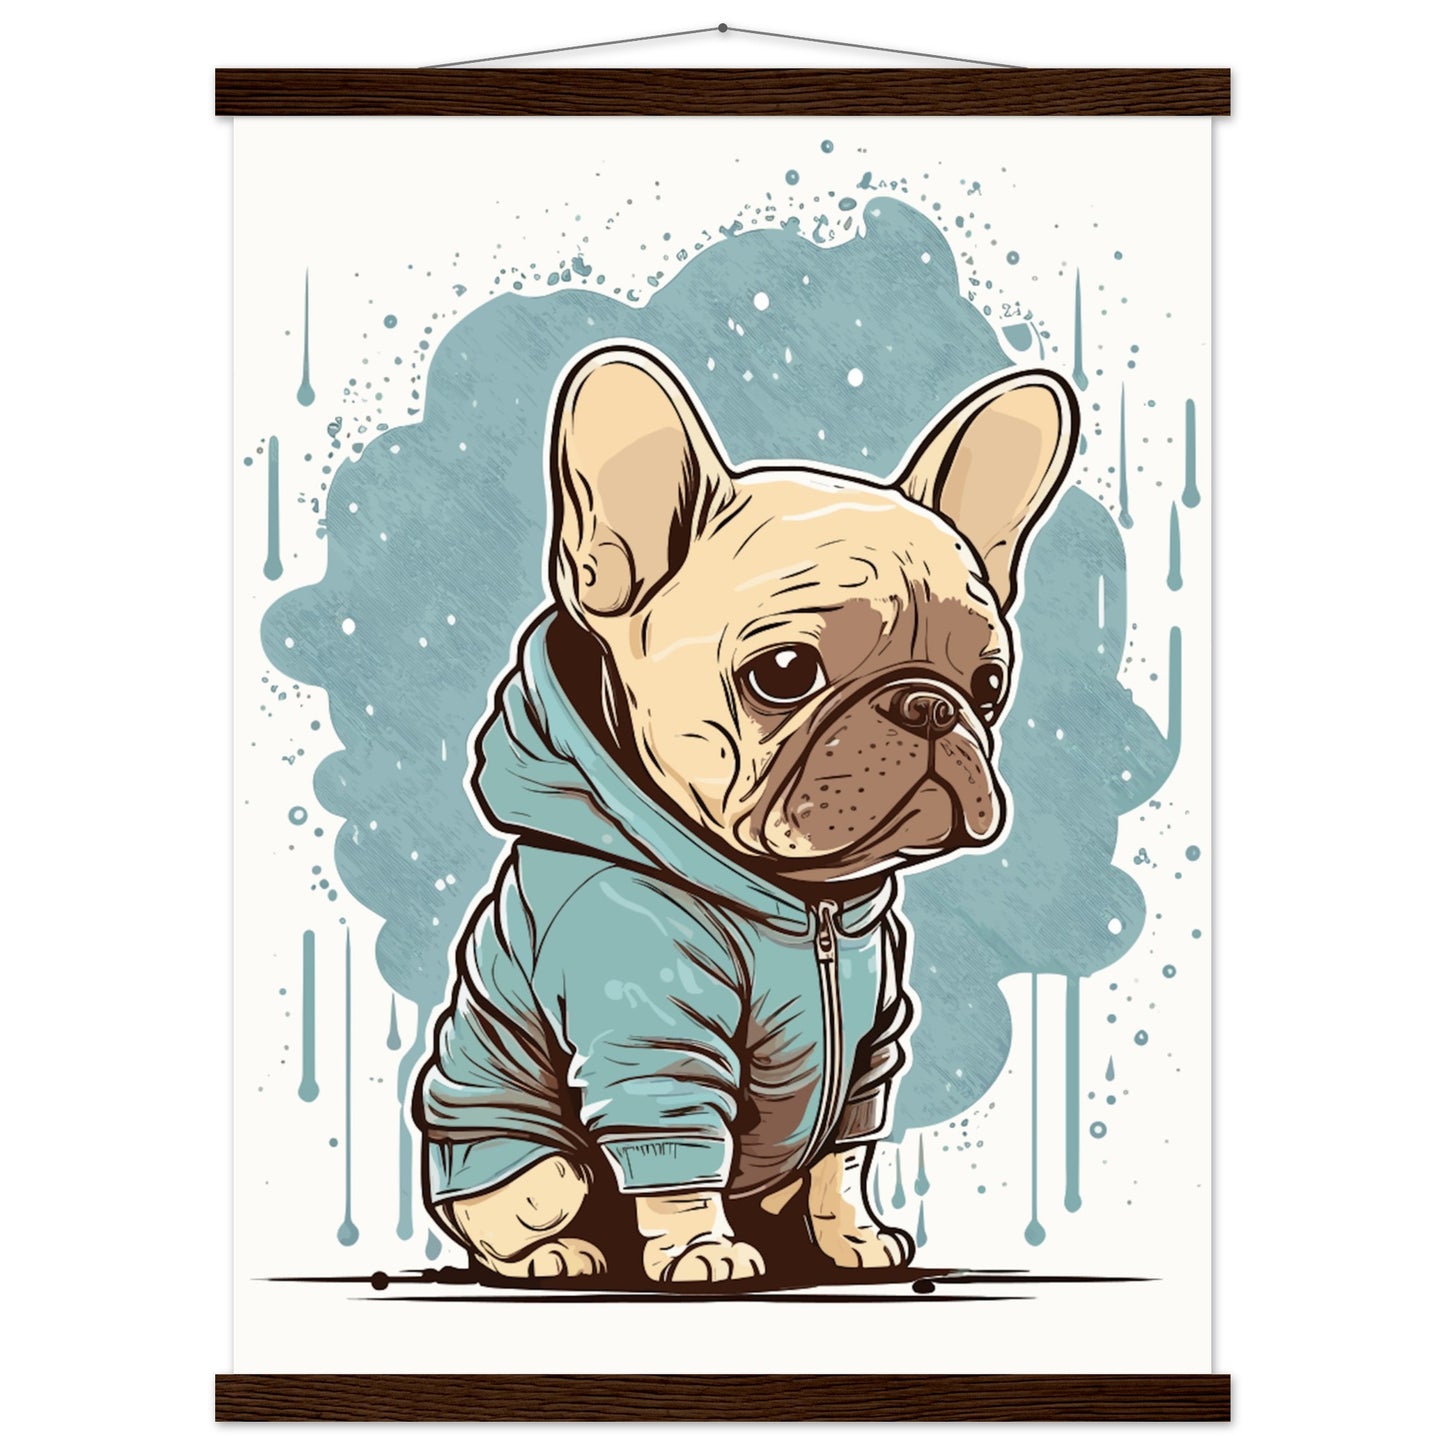 Dog Poster - Cute French Bulldog with light hoodie - Premium Matte Poster with Hanger 